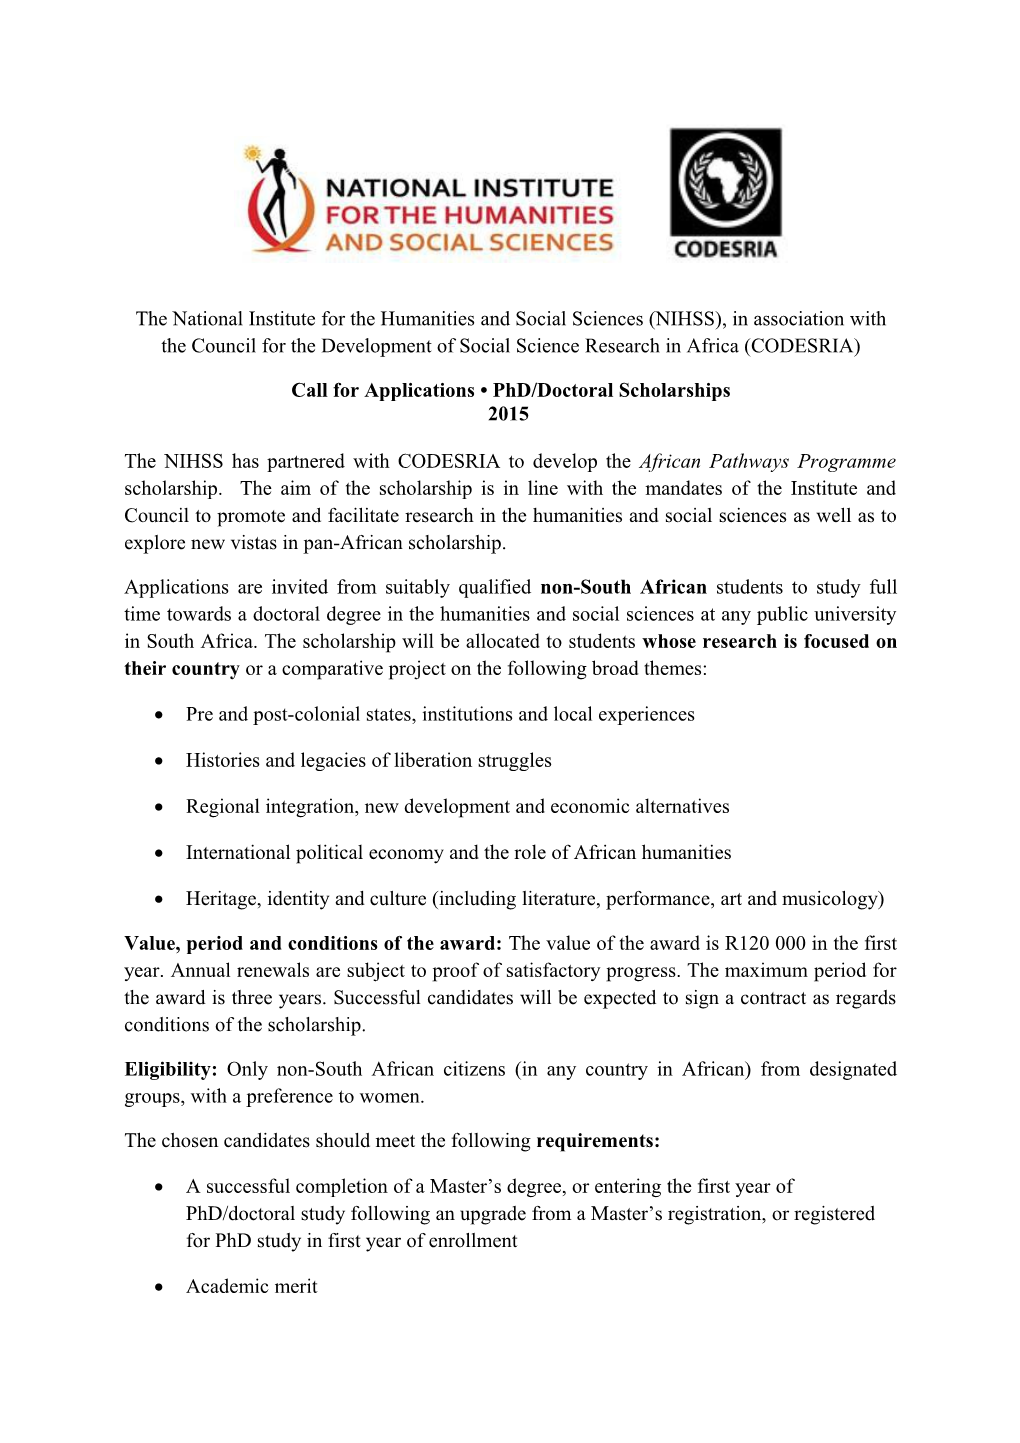 Call for Applications Phd/Doctoral Scholarships